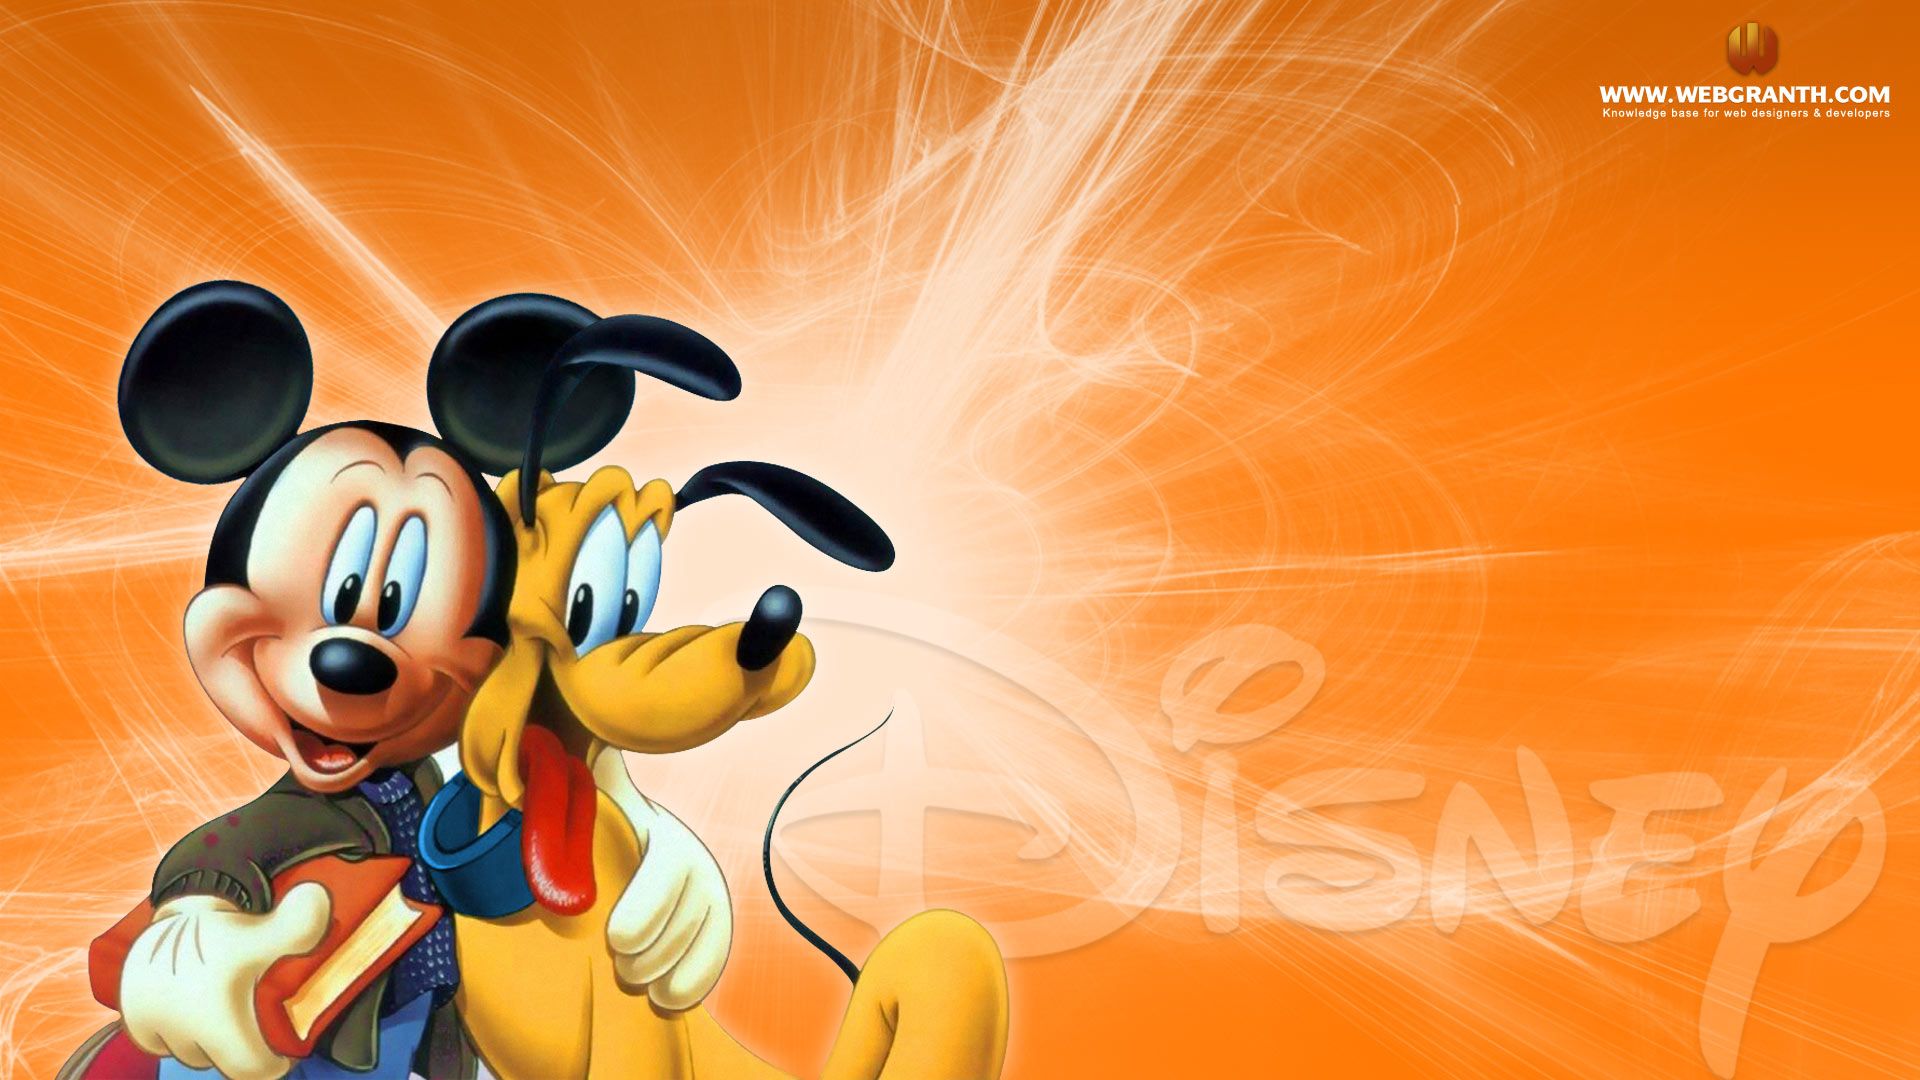 Disney Mickey Mouse And Pluto Wallpaper HD Widescreen Free Download, Wallpaper13.com